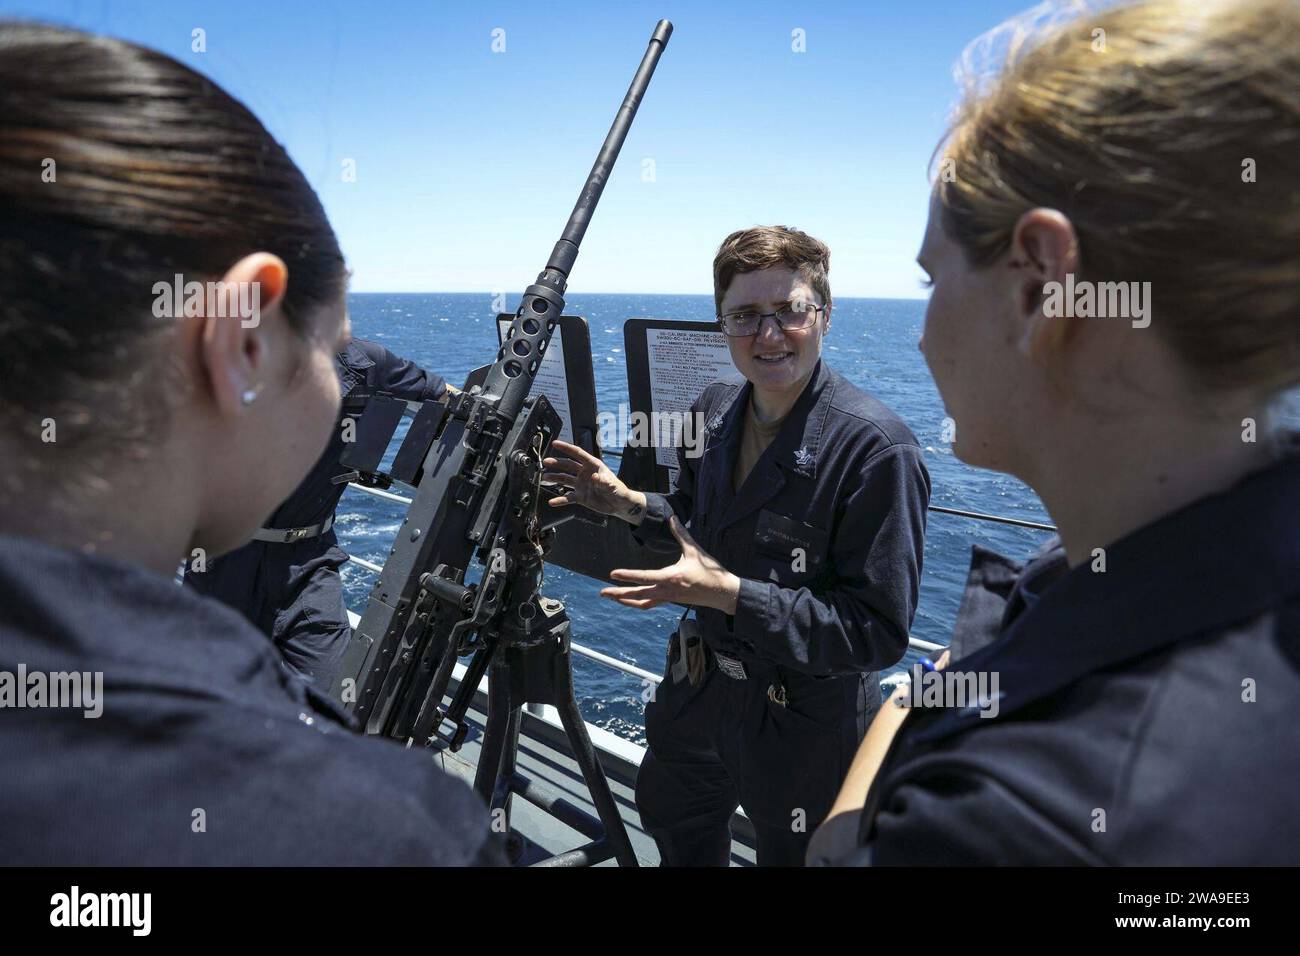 US military forces. 180701XT273-154 MEDITERRANEAN SEA (July 1, 2018) Gunner’s Mate 2nd Class Christina Nichols  trains Sailors and U.S. Naval Academy midshipmen on .50-caliber machine gun maintenance aboard the Blue Ridge-class command and control ship USS Mount Whitney (LCC 20) in the Mediterranean Sea, July 1, 2018. Mount Whitney, forward-deployed to Gaeta, Italy, operates with a combined crew of U.S. Navy Sailors and Military Sea Lift Command civil service mariners. (U.S. Navy photo by Mass Communication Specialist 1st Class Justin Stumberg/Released) Stock Photo